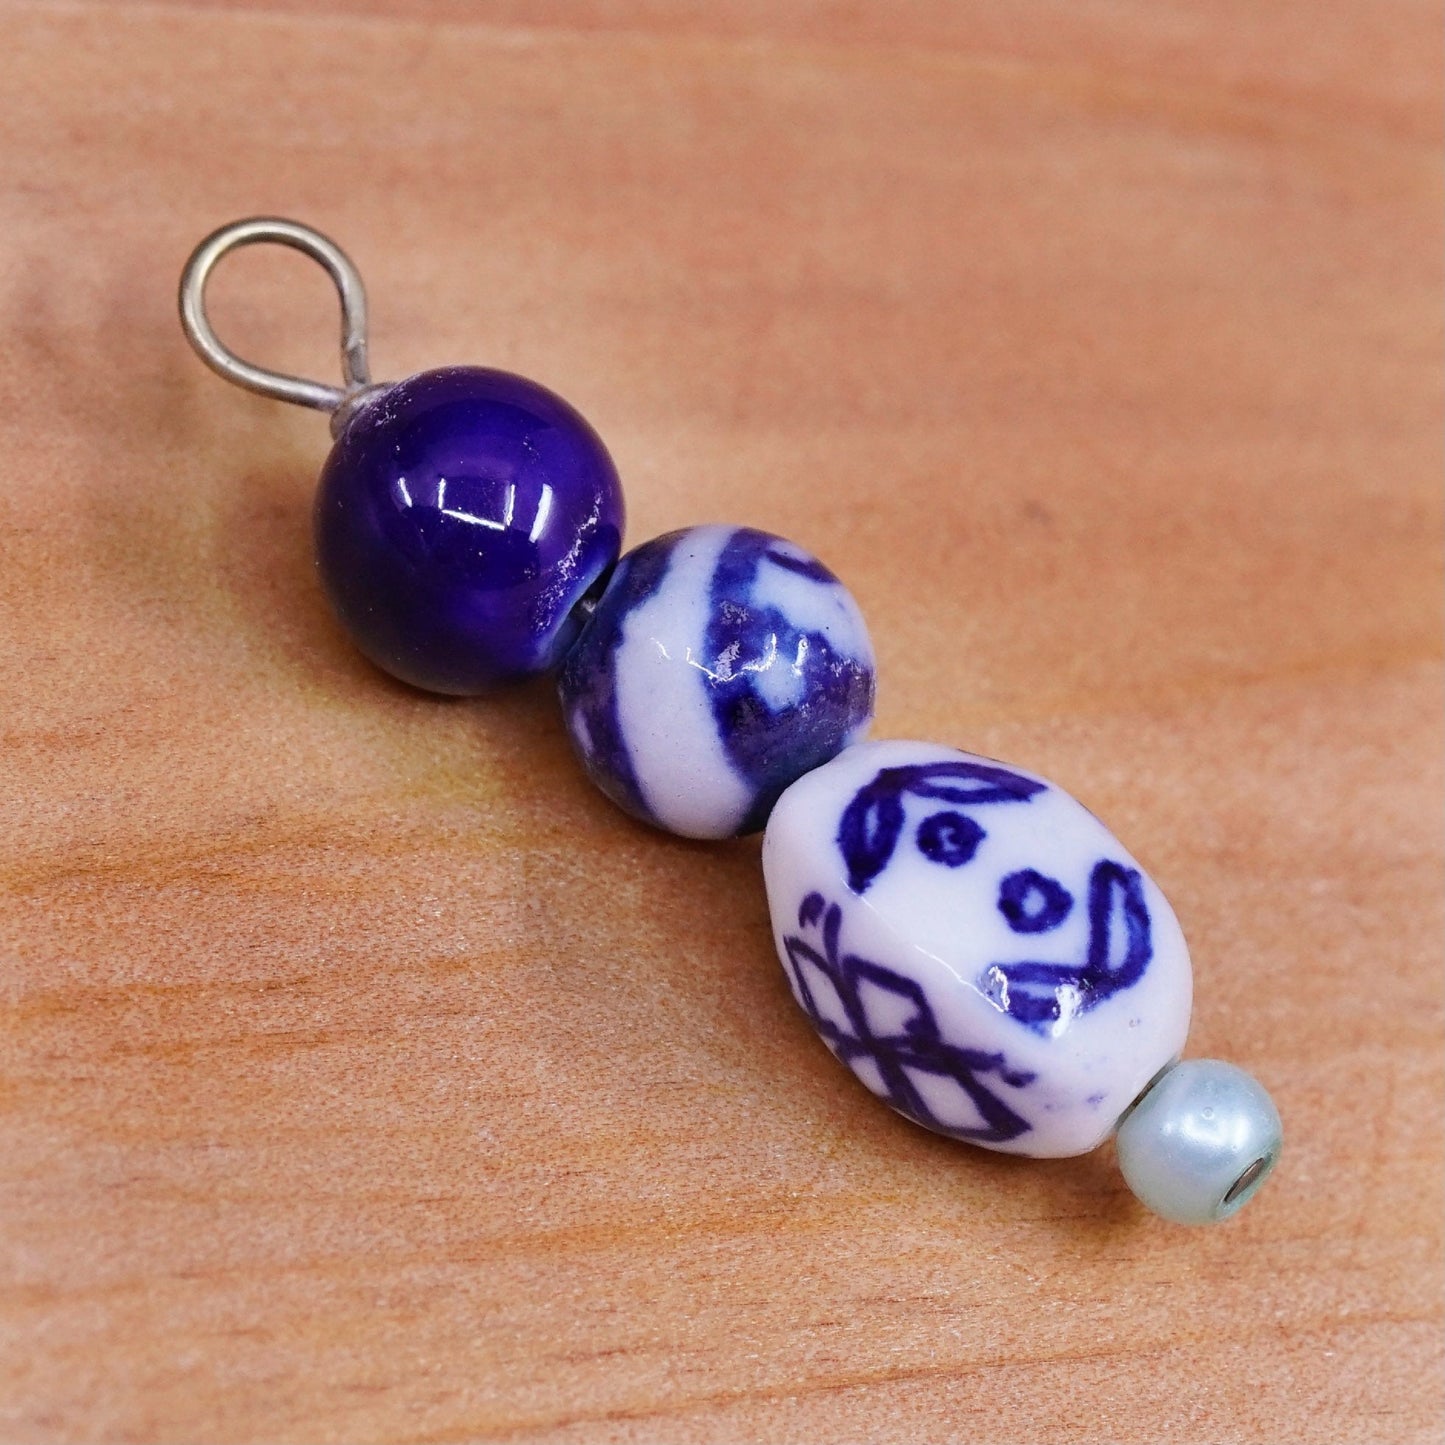 Vintage handmade pendant charm with china pottery beads